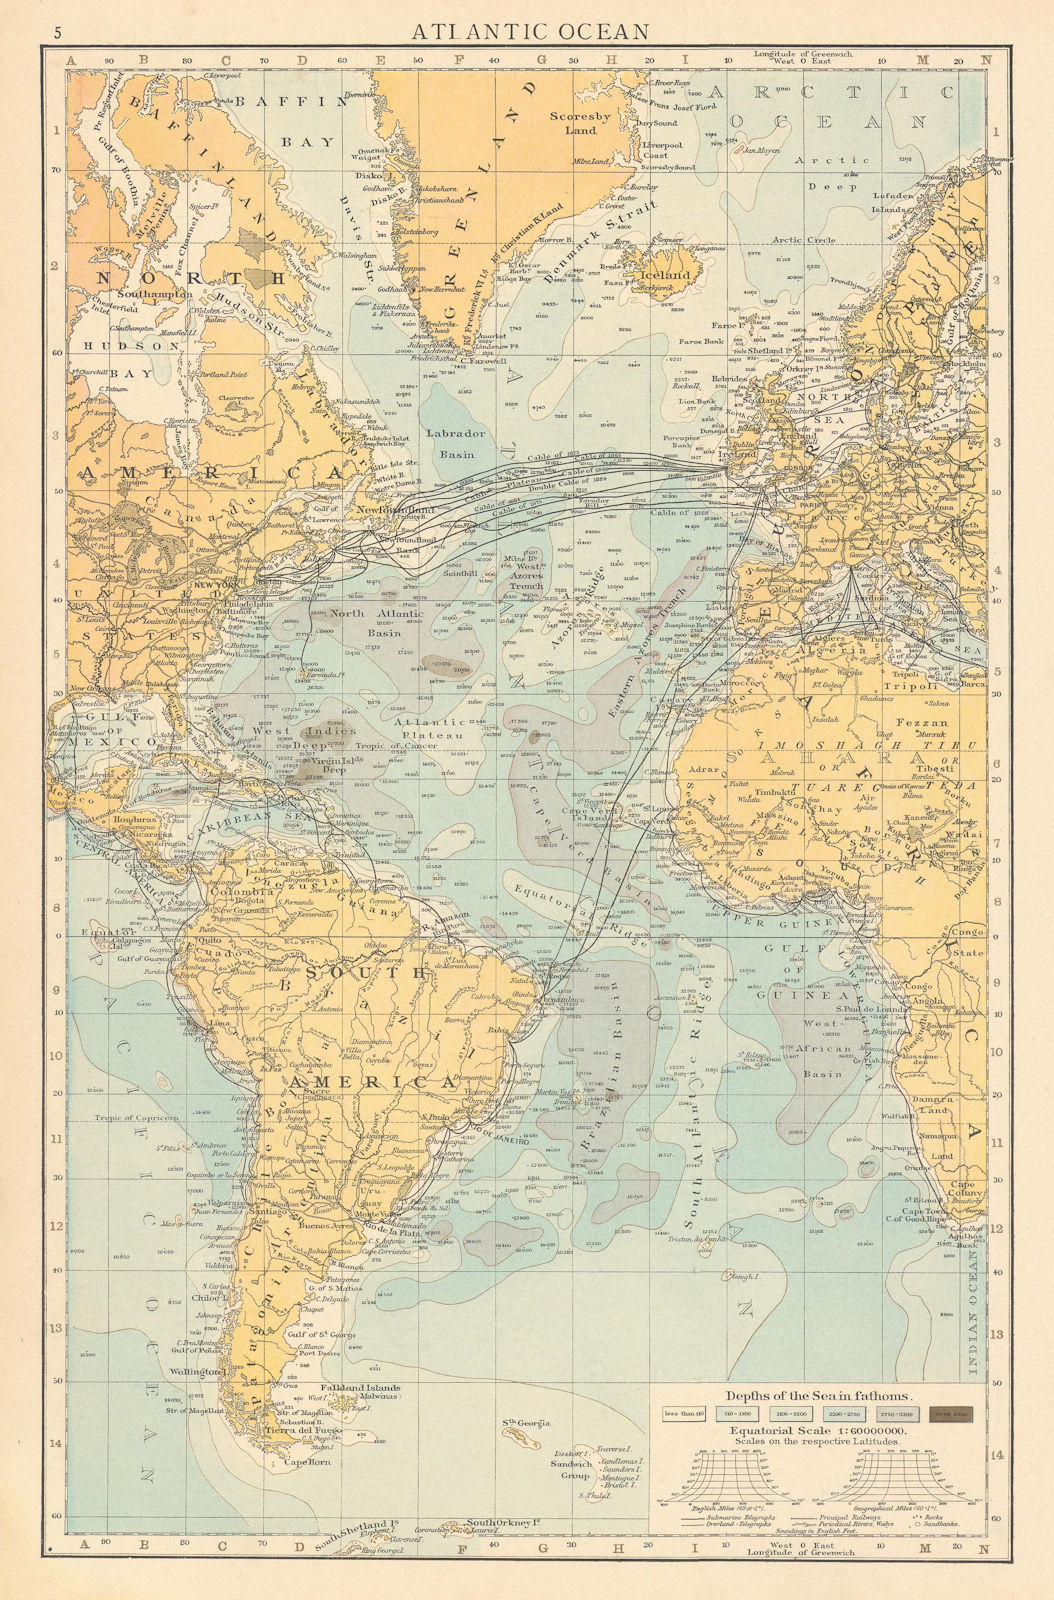 Associate Product Atlantic Ocean showing depths & telegraph cables. THE TIMES 1895 old map